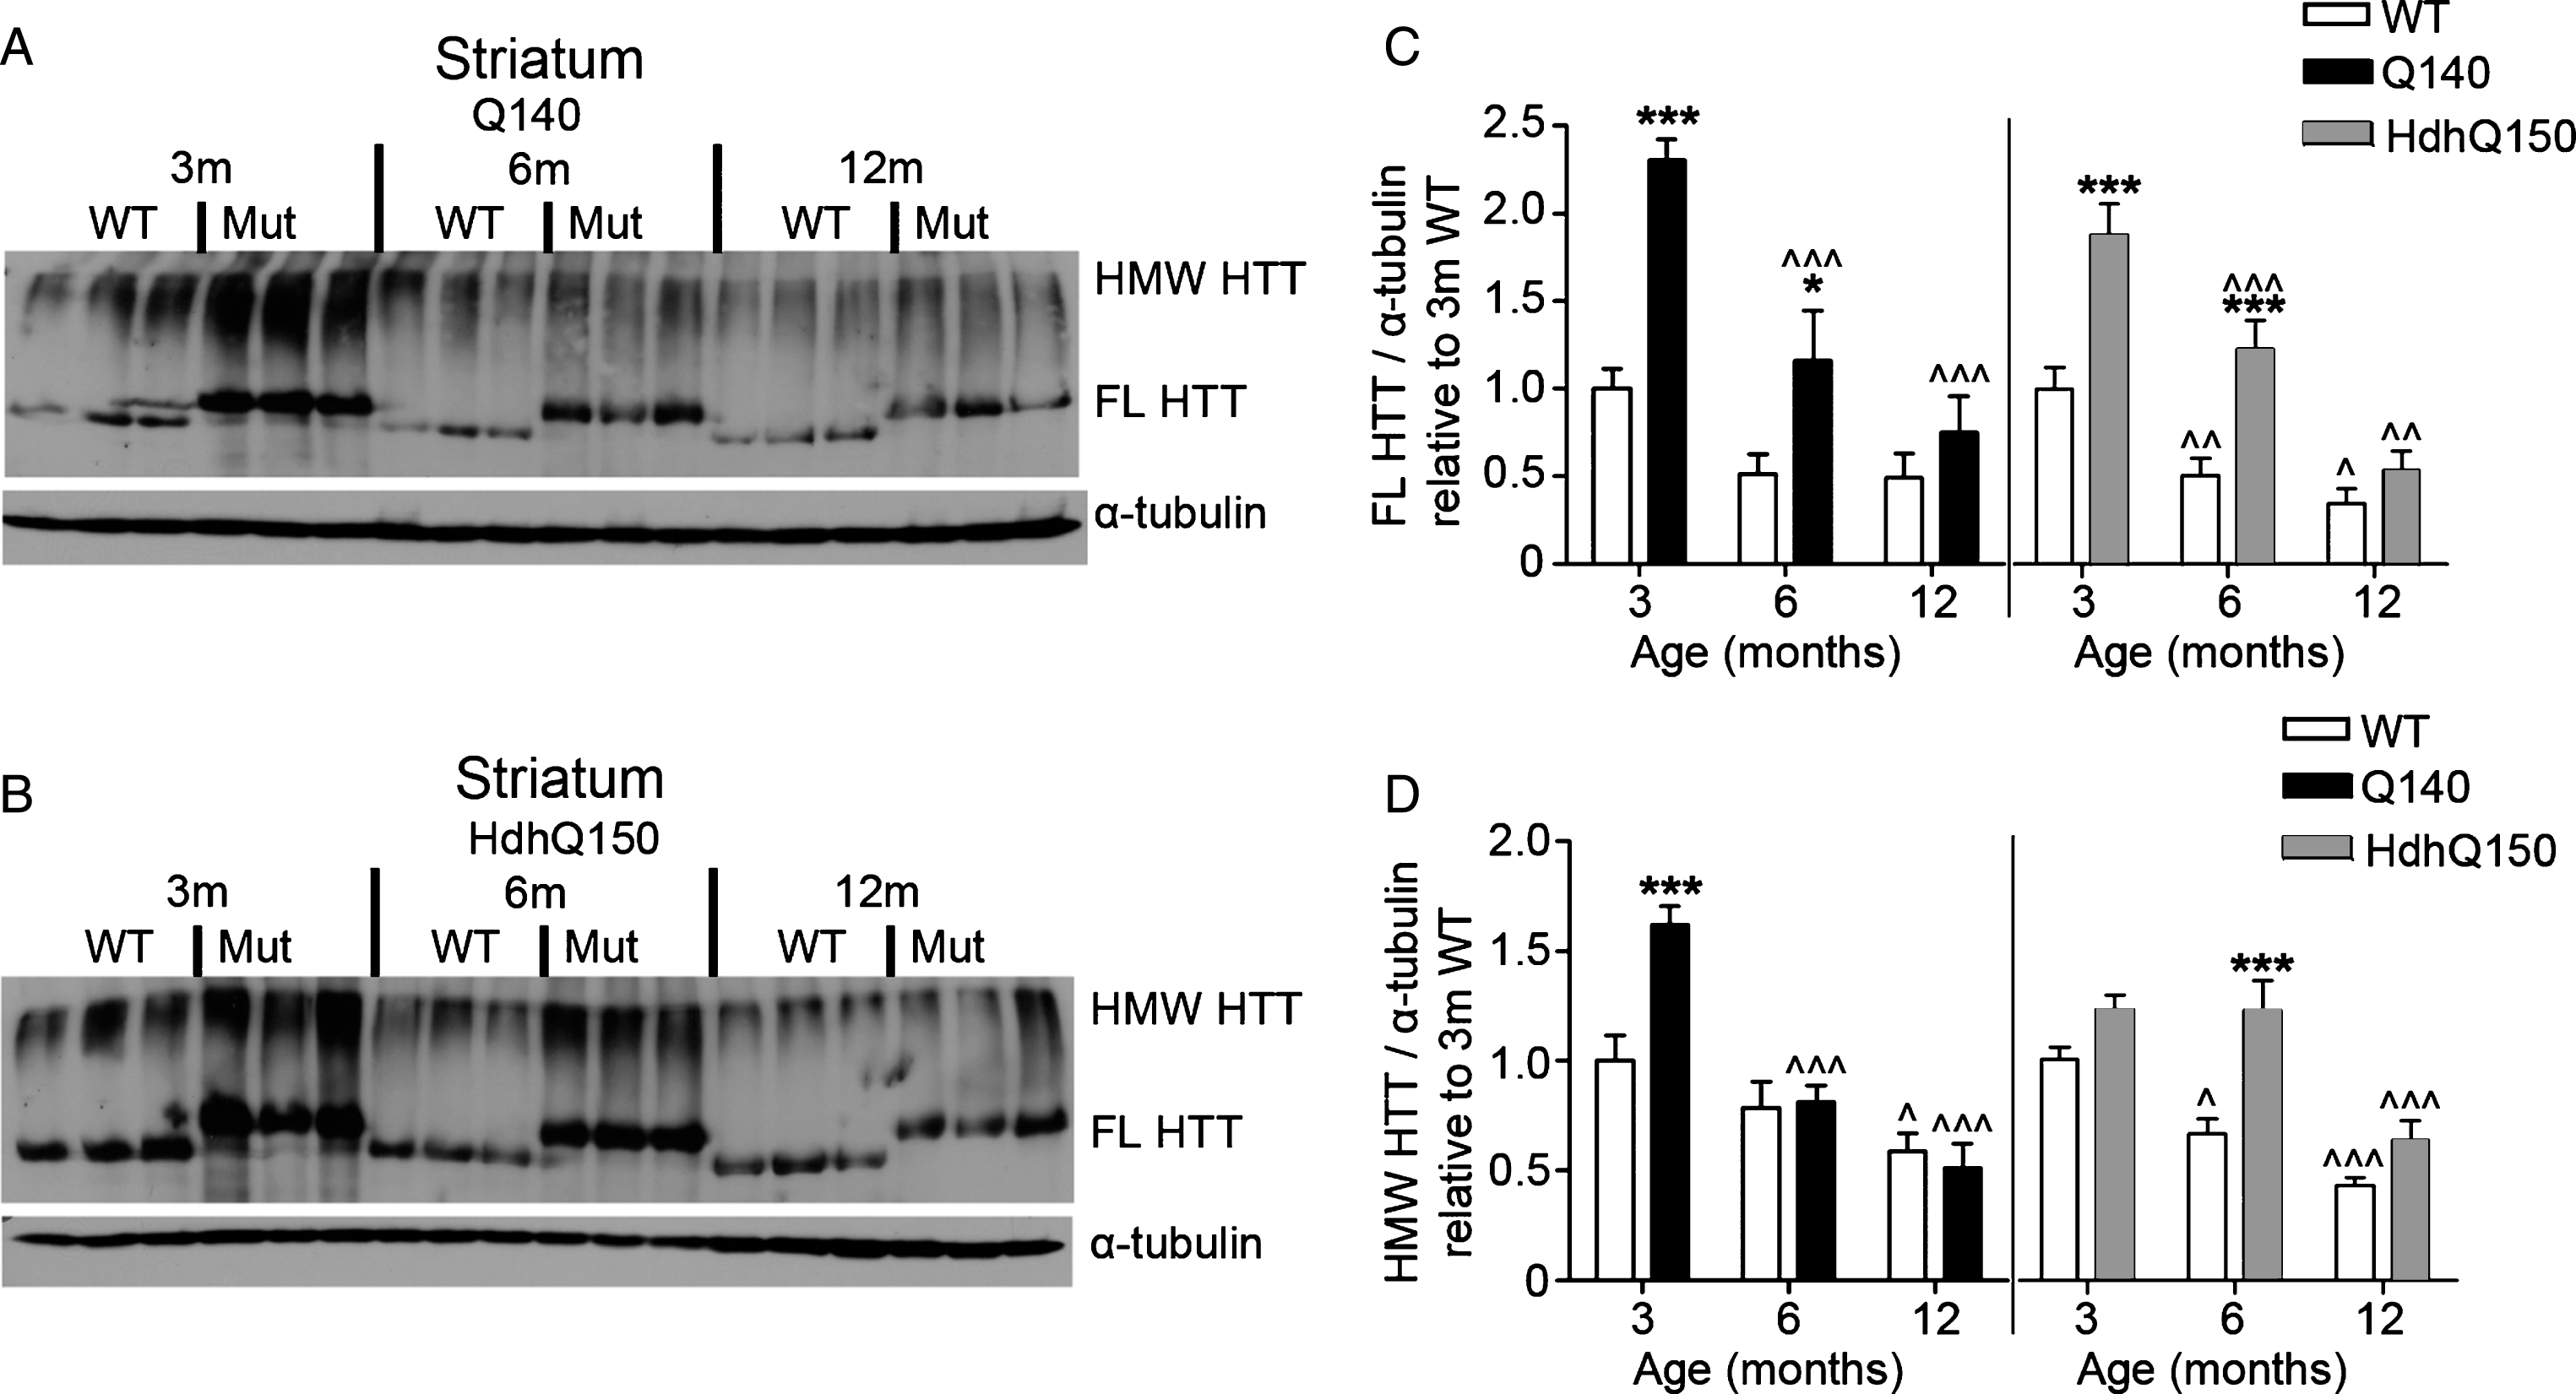 FL and HMW HTT protein levels detected with anti-HTT VB3130 decrease over time in striatum of homozygous Q140 and HdhQ150 mice. Western blots of full-length (FL) HTT (∼350 kDa) and high molecular weight (HMW) HTT species (running at the top of the separating gel) and α-tubulin loading control, at 3, 6 and 12 months of age in knock-in mice and their WT littermates in (A) Q140 striatum, and (B) HdhQ150 striatum. Protein lysate samples were run across two western blots for each knock-in mouse line and data were averaged, n = 3 per group per western blot for a total of n = 6 mice per group. Graphs show mean+SEM (n = 6) HTT/α-tubulin in 3, 6 and 12 months old Q140 and HdhQ150 mice and WT littermates, relative to WT levels at 3 months for (C) striatal FL HTT, and (D) striatal HMW HTT. Two-way ANOVA with Bonferroni post-hoc tests, within each knock-in mouse line: *p < 0.05, **p < 0.01, ***p < 0.001, compared to WT littermates at the same age;  ∧
p < 0.05,  ∧∧
p < 0.01,  ∧∧∧
p < 0.001, compared to 3 month old mice of the same genotype.